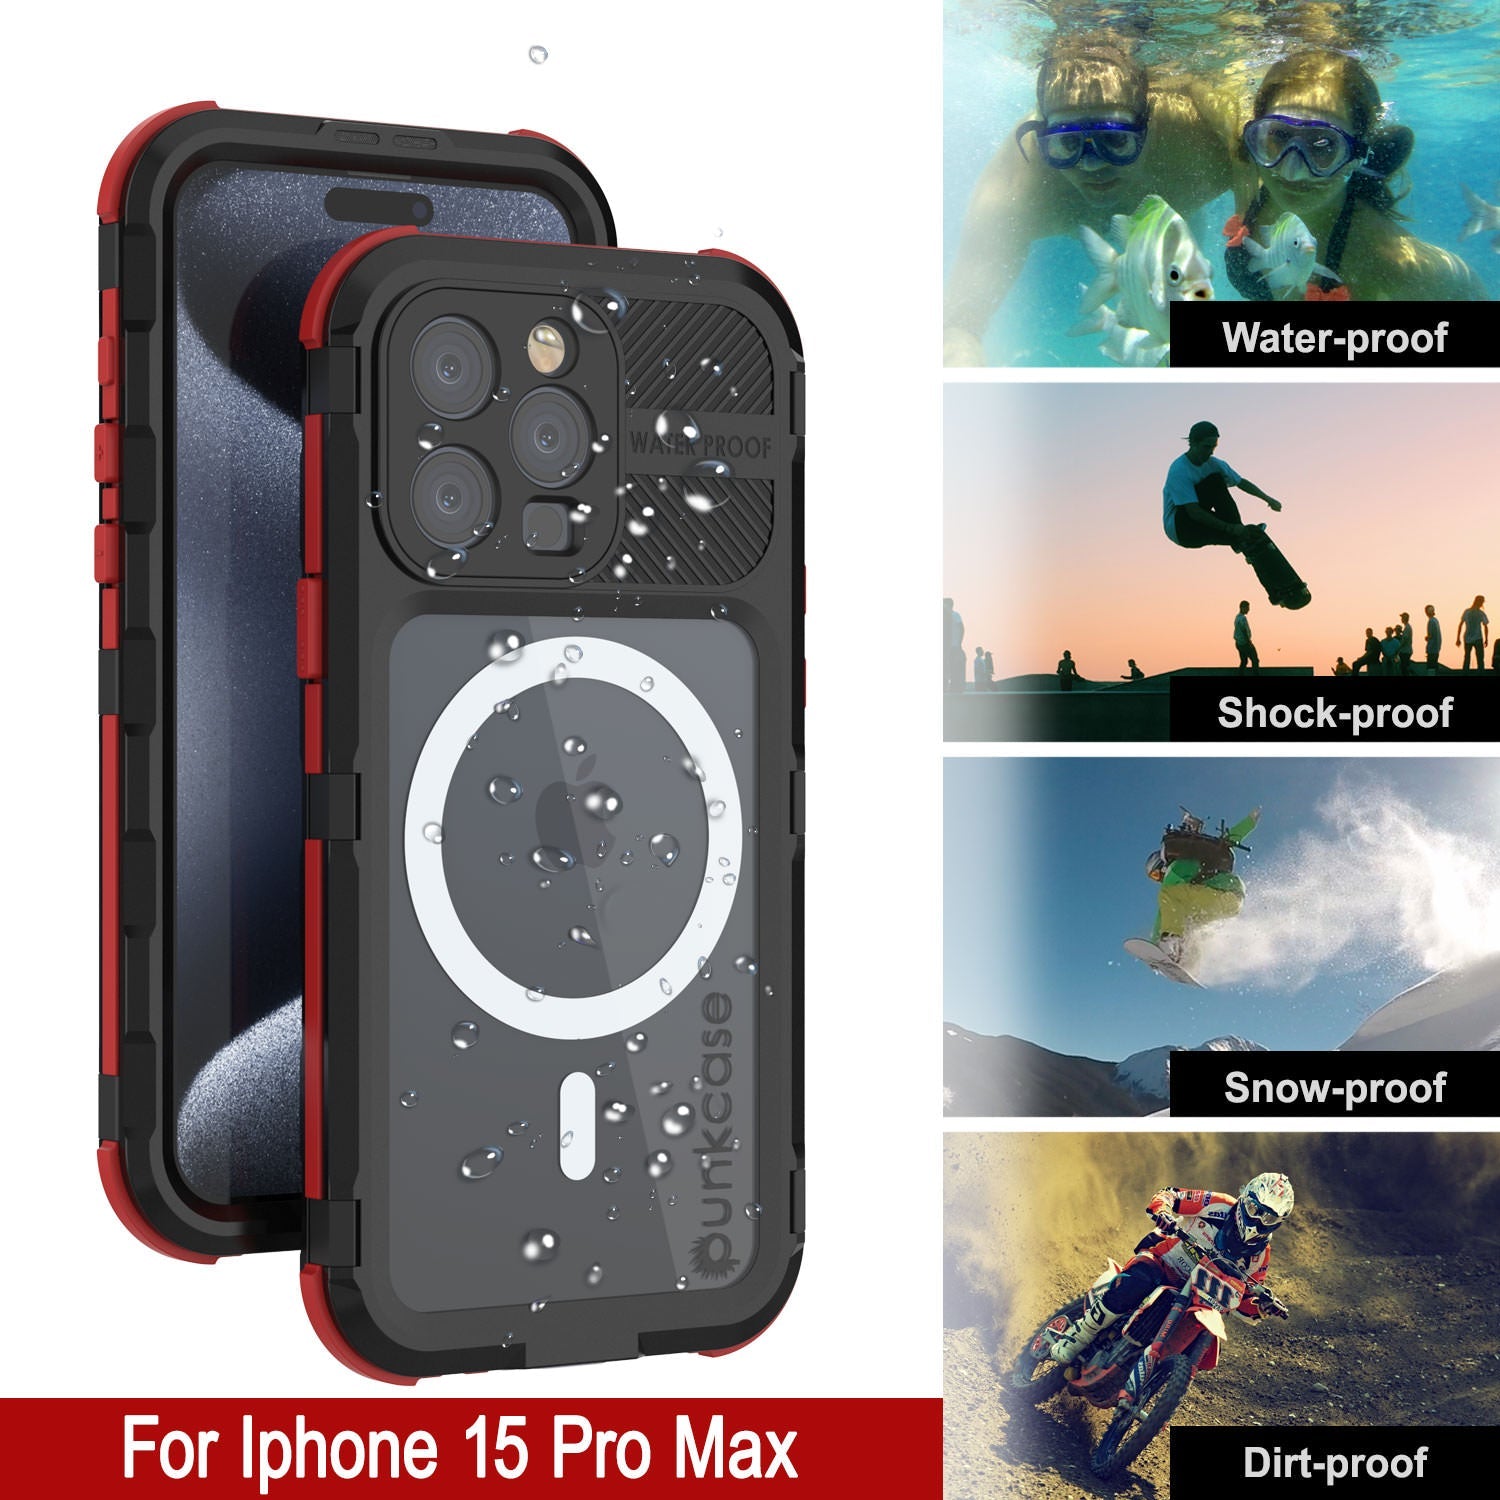 iPhone 15 Pro Max Metal Extreme 2.0 Series Aluminum Waterproof Case IP68 W/Buillt in Screen Protector [Black-Red]